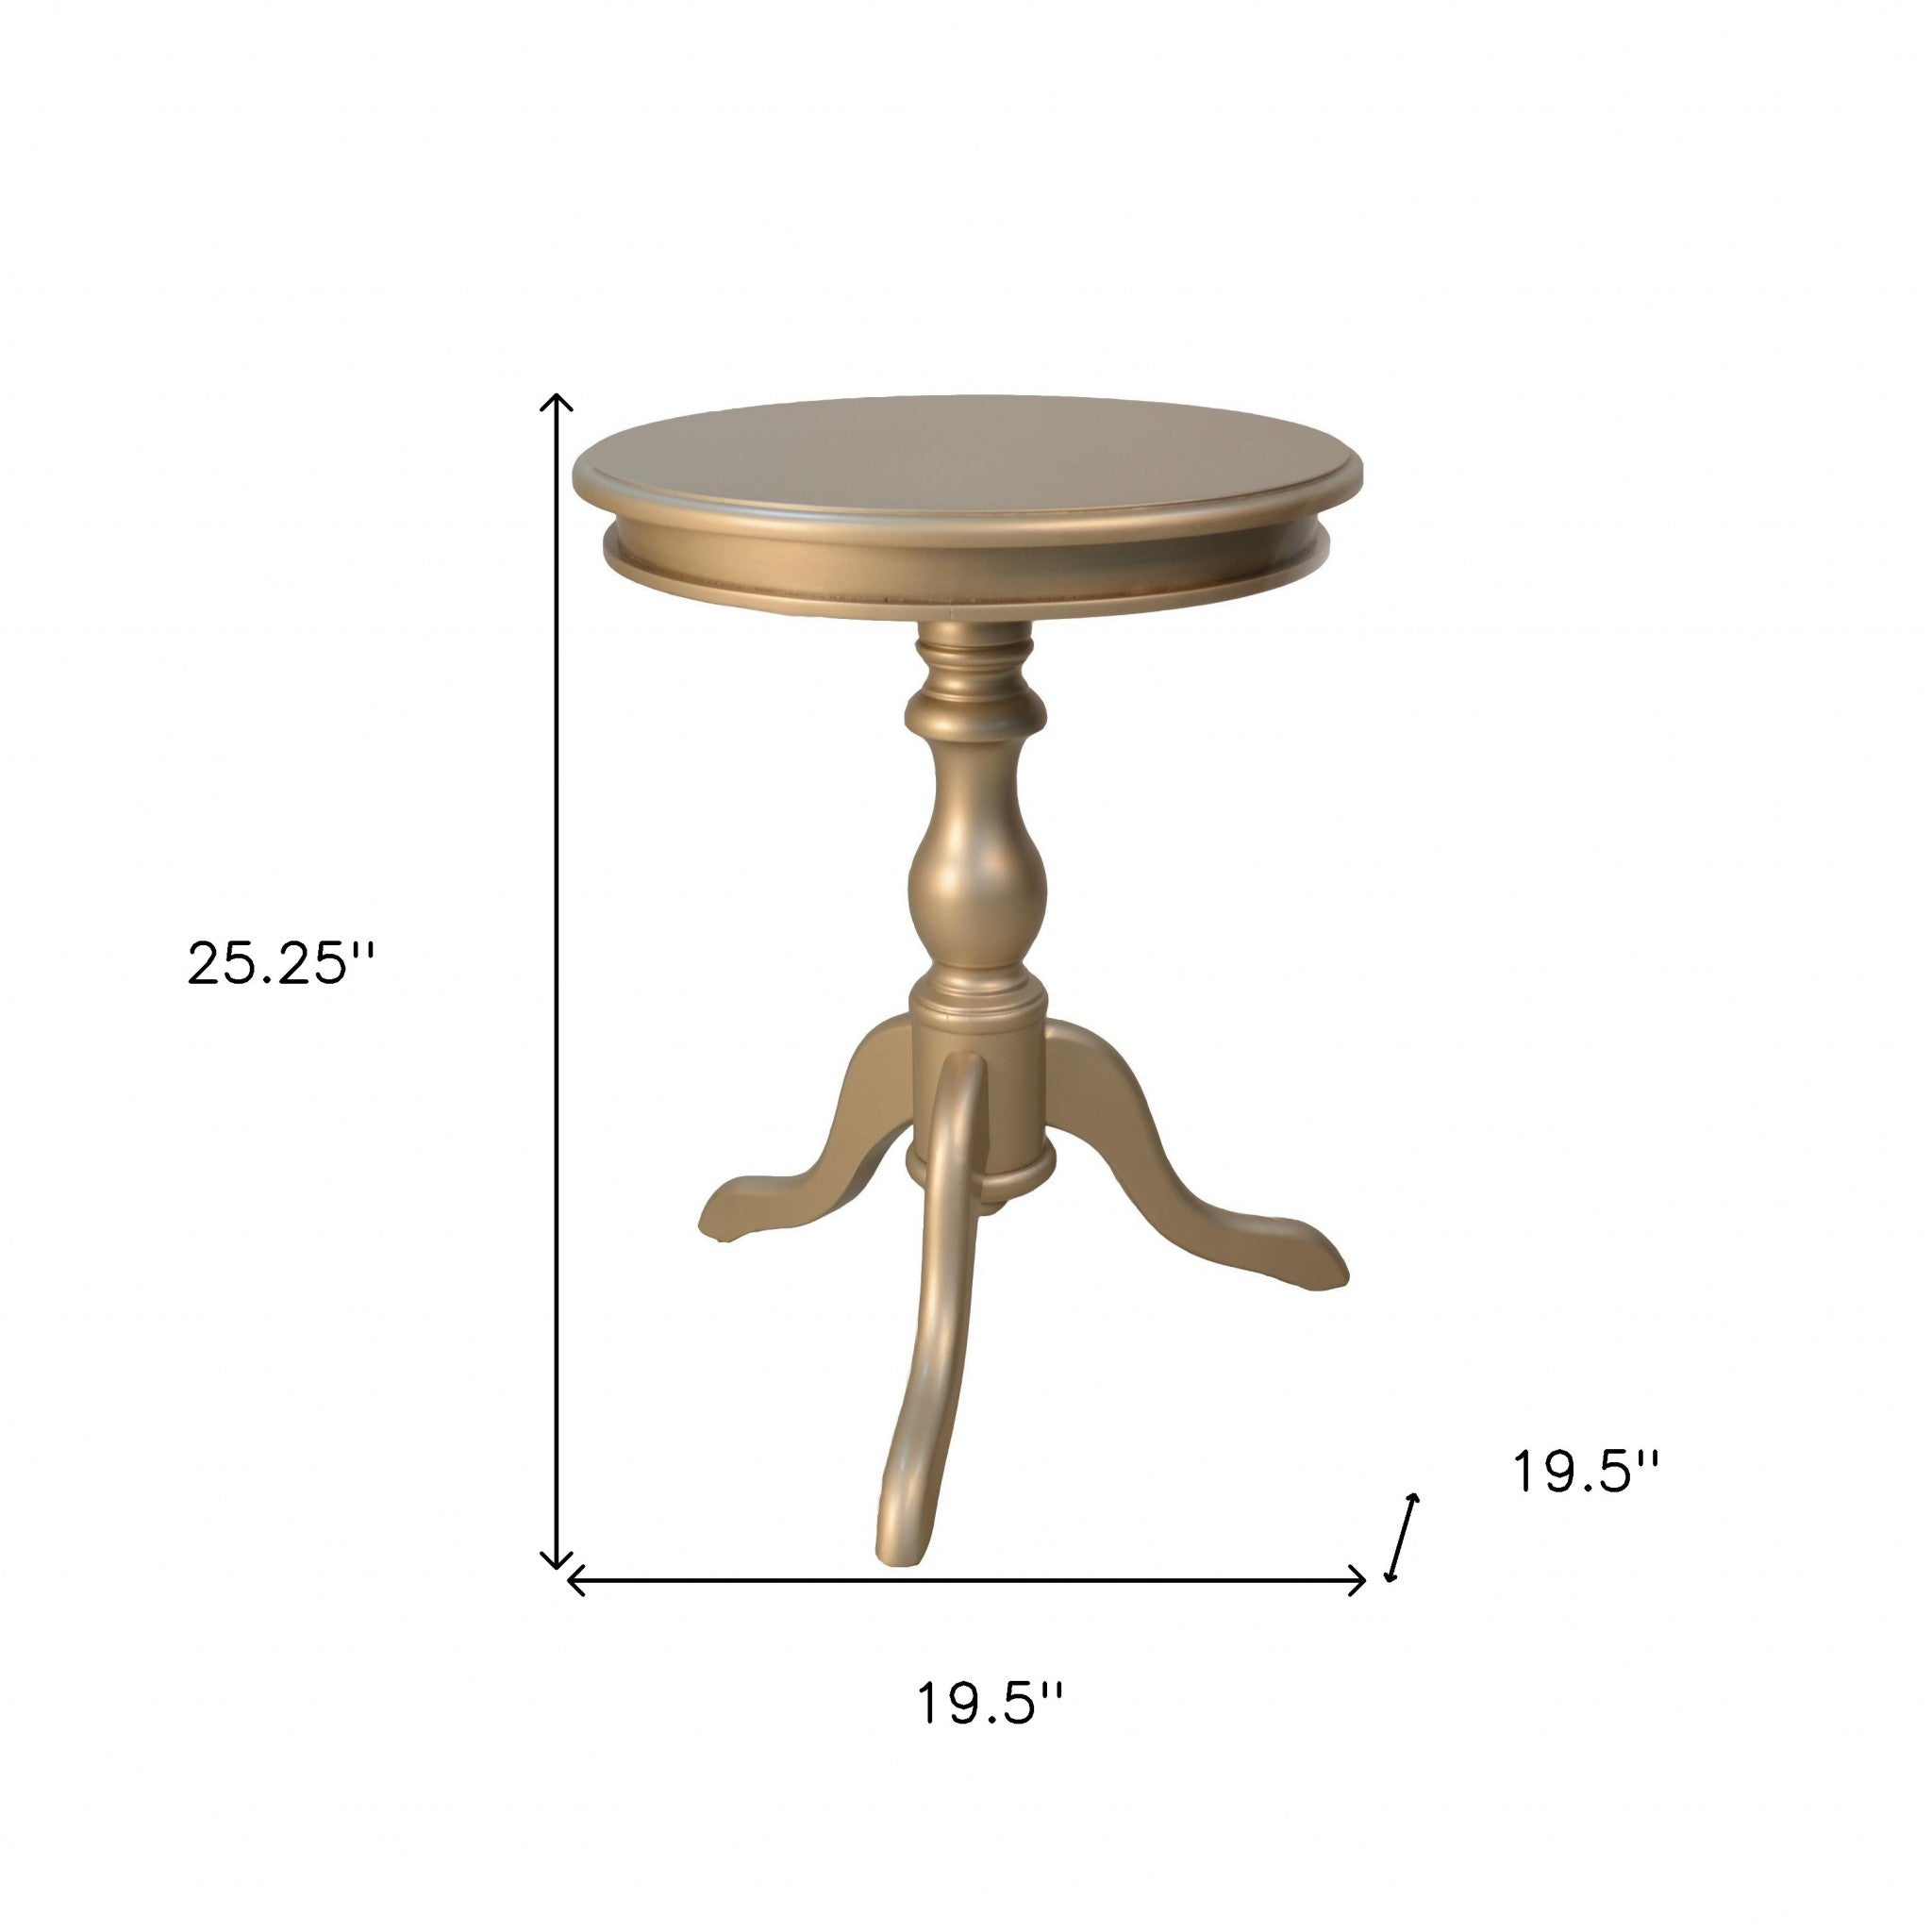 25" Champagne Manufactured Wood Round End Table